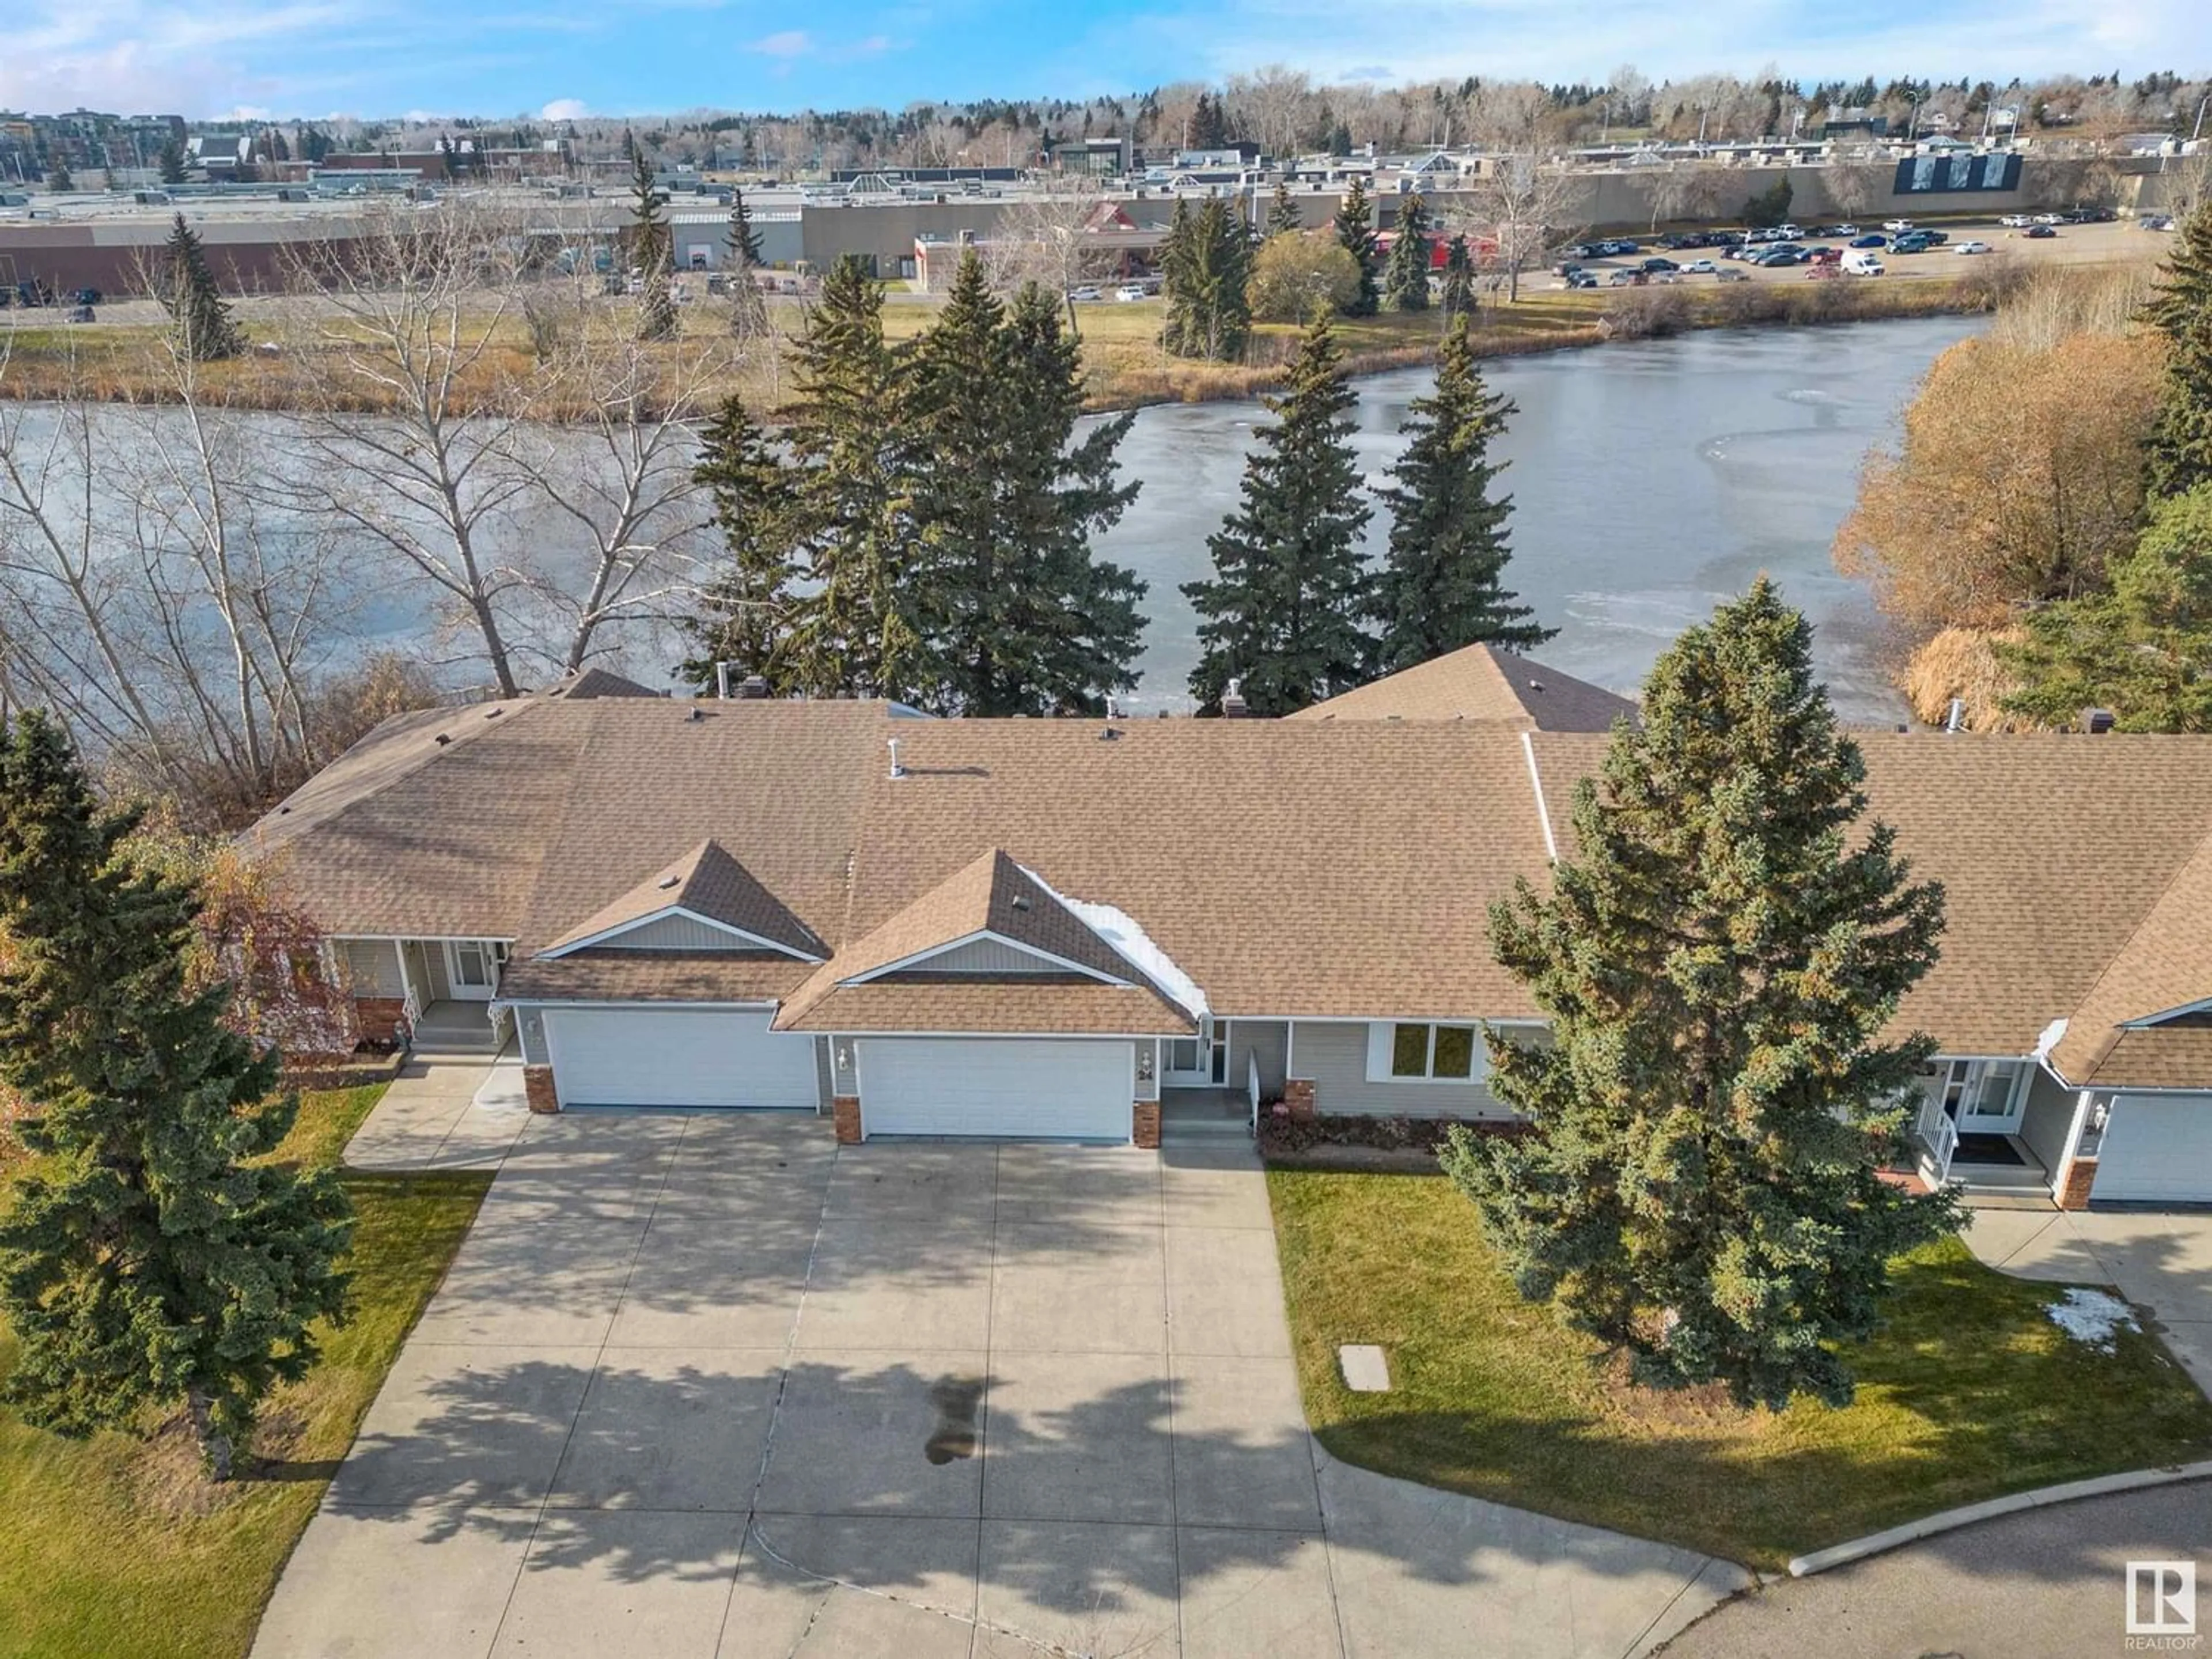 Lakeview for #24 2 GEORGIAN WY, Sherwood Park Alberta T8A5K3